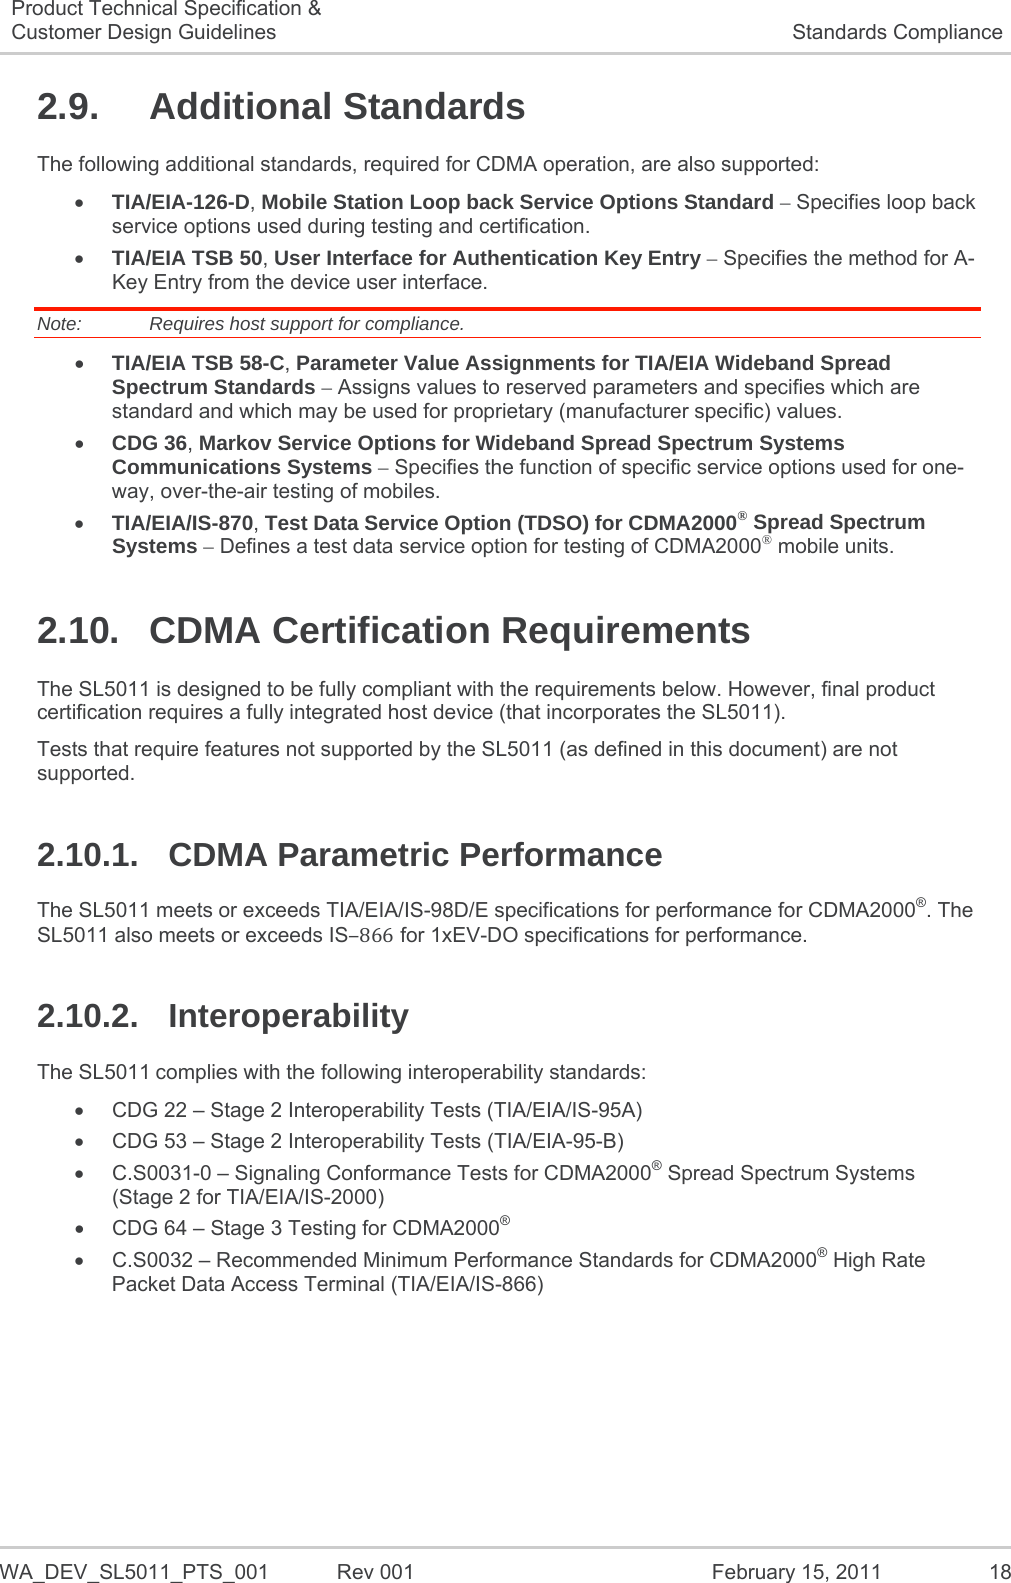   WA_DEV_SL5011_PTS_001  Rev 001  February 15, 2011  18 Product Technical Specification &amp; Customer Design Guidelines  Standards Compliance 2.9. Additional Standards The following additional standards, required for CDMA operation, are also supported:  TIA/EIA-126-D, Mobile Station Loop back Service Options Standard – Specifies loop back service options used during testing and certification.  TIA/EIA TSB 50, User Interface for Authentication Key Entry – Specifies the method for A-Key Entry from the device user interface. Note:   Requires host support for compliance.  TIA/EIA TSB 58-C, Parameter Value Assignments for TIA/EIA Wideband Spread Spectrum Standards – Assigns values to reserved parameters and specifies which are standard and which may be used for proprietary (manufacturer specific) values.  CDG 36, Markov Service Options for Wideband Spread Spectrum Systems Communications Systems – Specifies the function of specific service options used for one-way, over-the-air testing of mobiles.  TIA/EIA/IS-870, Test Data Service Option (TDSO) for CDMA2000® Spread Spectrum Systems – Defines a test data service option for testing of CDMA2000® mobile units. 2.10. CDMA Certification Requirements The SL5011 is designed to be fully compliant with the requirements below. However, final product certification requires a fully integrated host device (that incorporates the SL5011). Tests that require features not supported by the SL5011 (as defined in this document) are not supported. 2.10.1. CDMA Parametric Performance The SL5011 meets or exceeds TIA/EIA/IS-98D/E specifications for performance for CDMA2000®. The SL5011 also meets or exceeds IS866 for 1xEV-DO specifications for performance. 2.10.2. Interoperability The SL5011 complies with the following interoperability standards:   CDG 22 – Stage 2 Interoperability Tests (TIA/EIA/IS-95A)   CDG 53 – Stage 2 Interoperability Tests (TIA/EIA-95-B)   C.S0031-0 – Signaling Conformance Tests for CDMA2000® Spread Spectrum Systems (Stage 2 for TIA/EIA/IS-2000)   CDG 64 – Stage 3 Testing for CDMA2000®   C.S0032 – Recommended Minimum Performance Standards for CDMA2000® High Rate Packet Data Access Terminal (TIA/EIA/IS-866)   